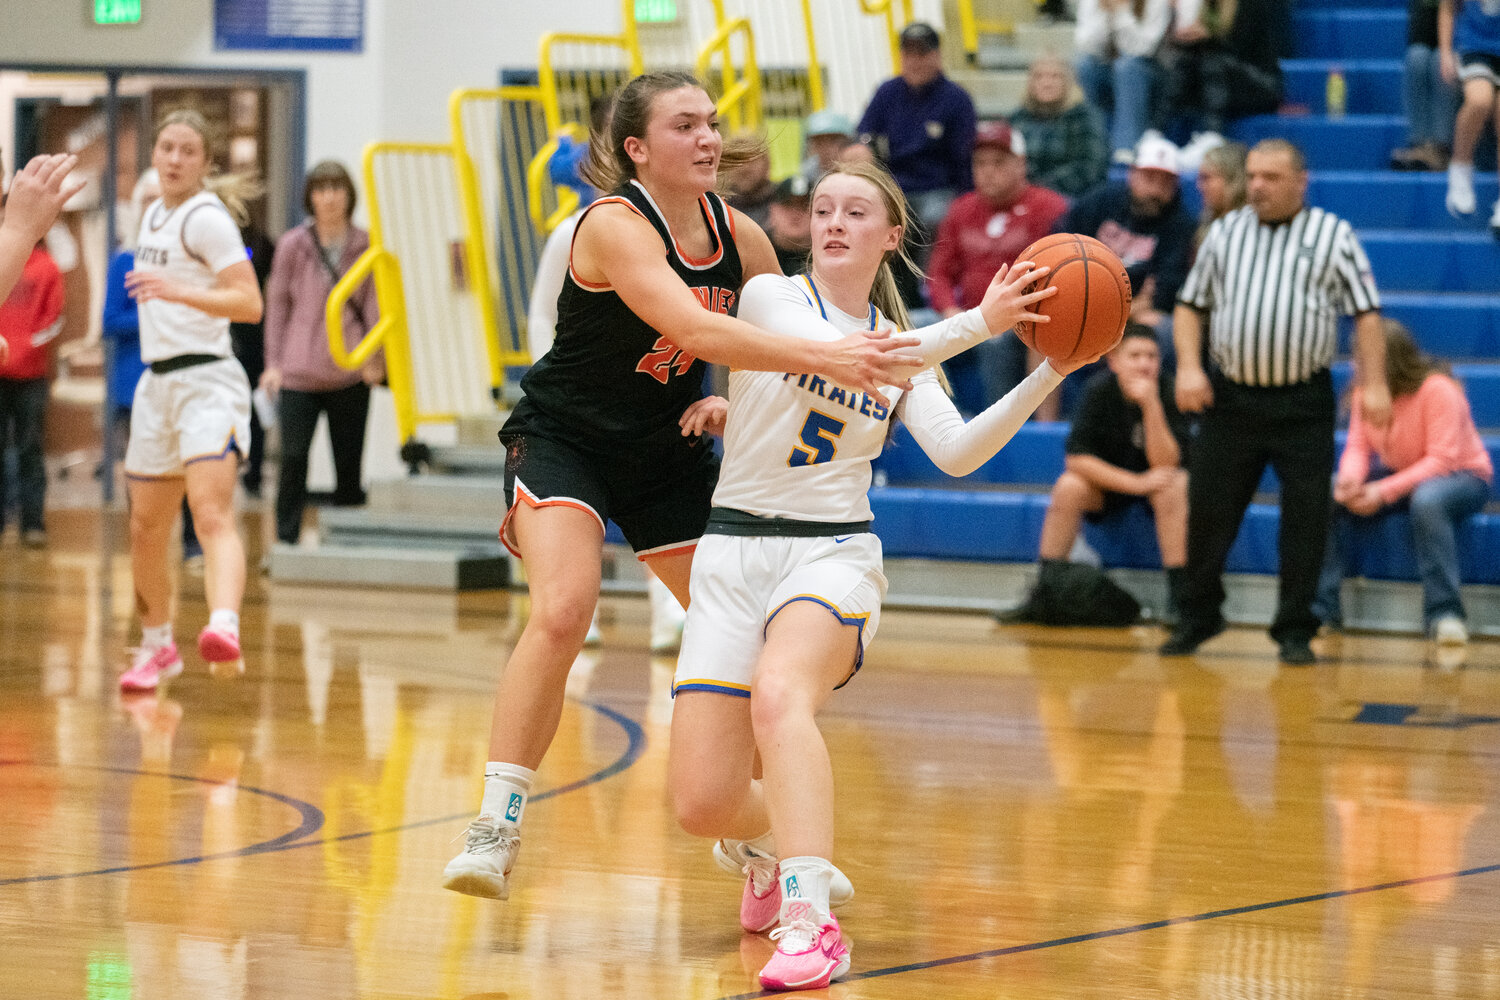 Rainier's Bryn Beckman guards Adna's Gaby Guard during the first half of the Mountaineer's 52-49 win over the Pirates on Dec. 8.